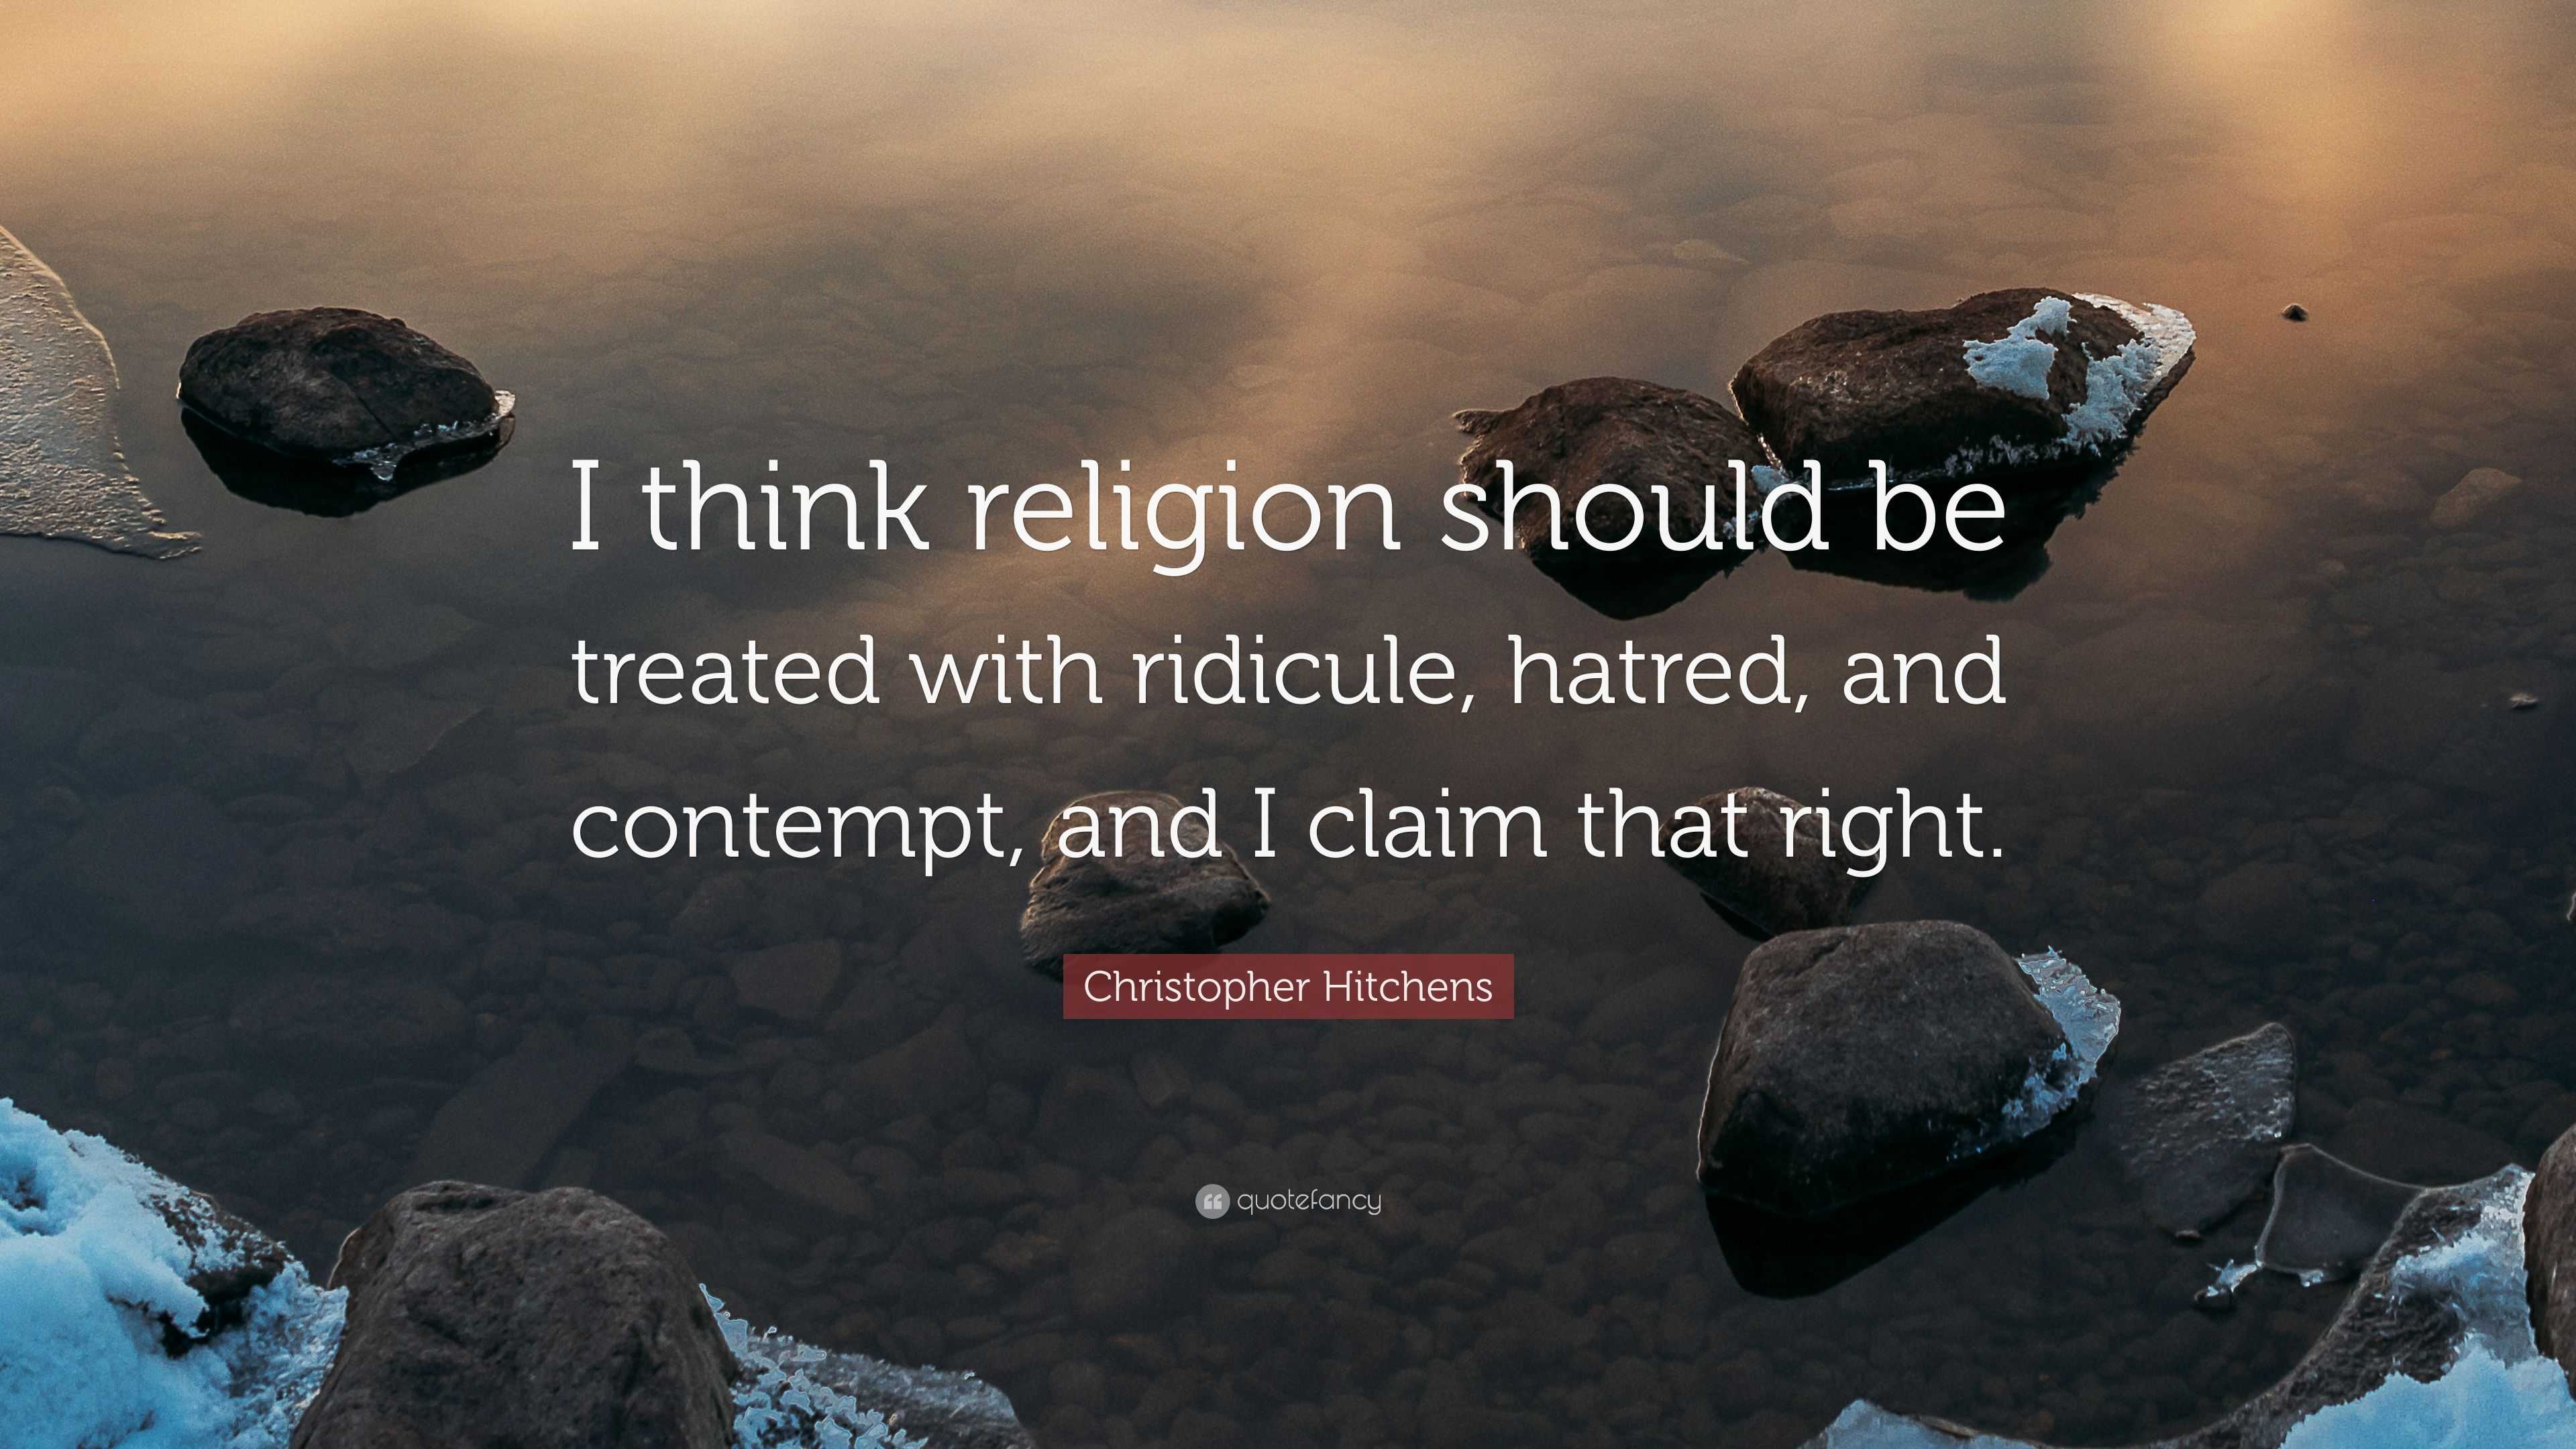 Christopher Hitchens Quote: “I think religion should be treated with ...